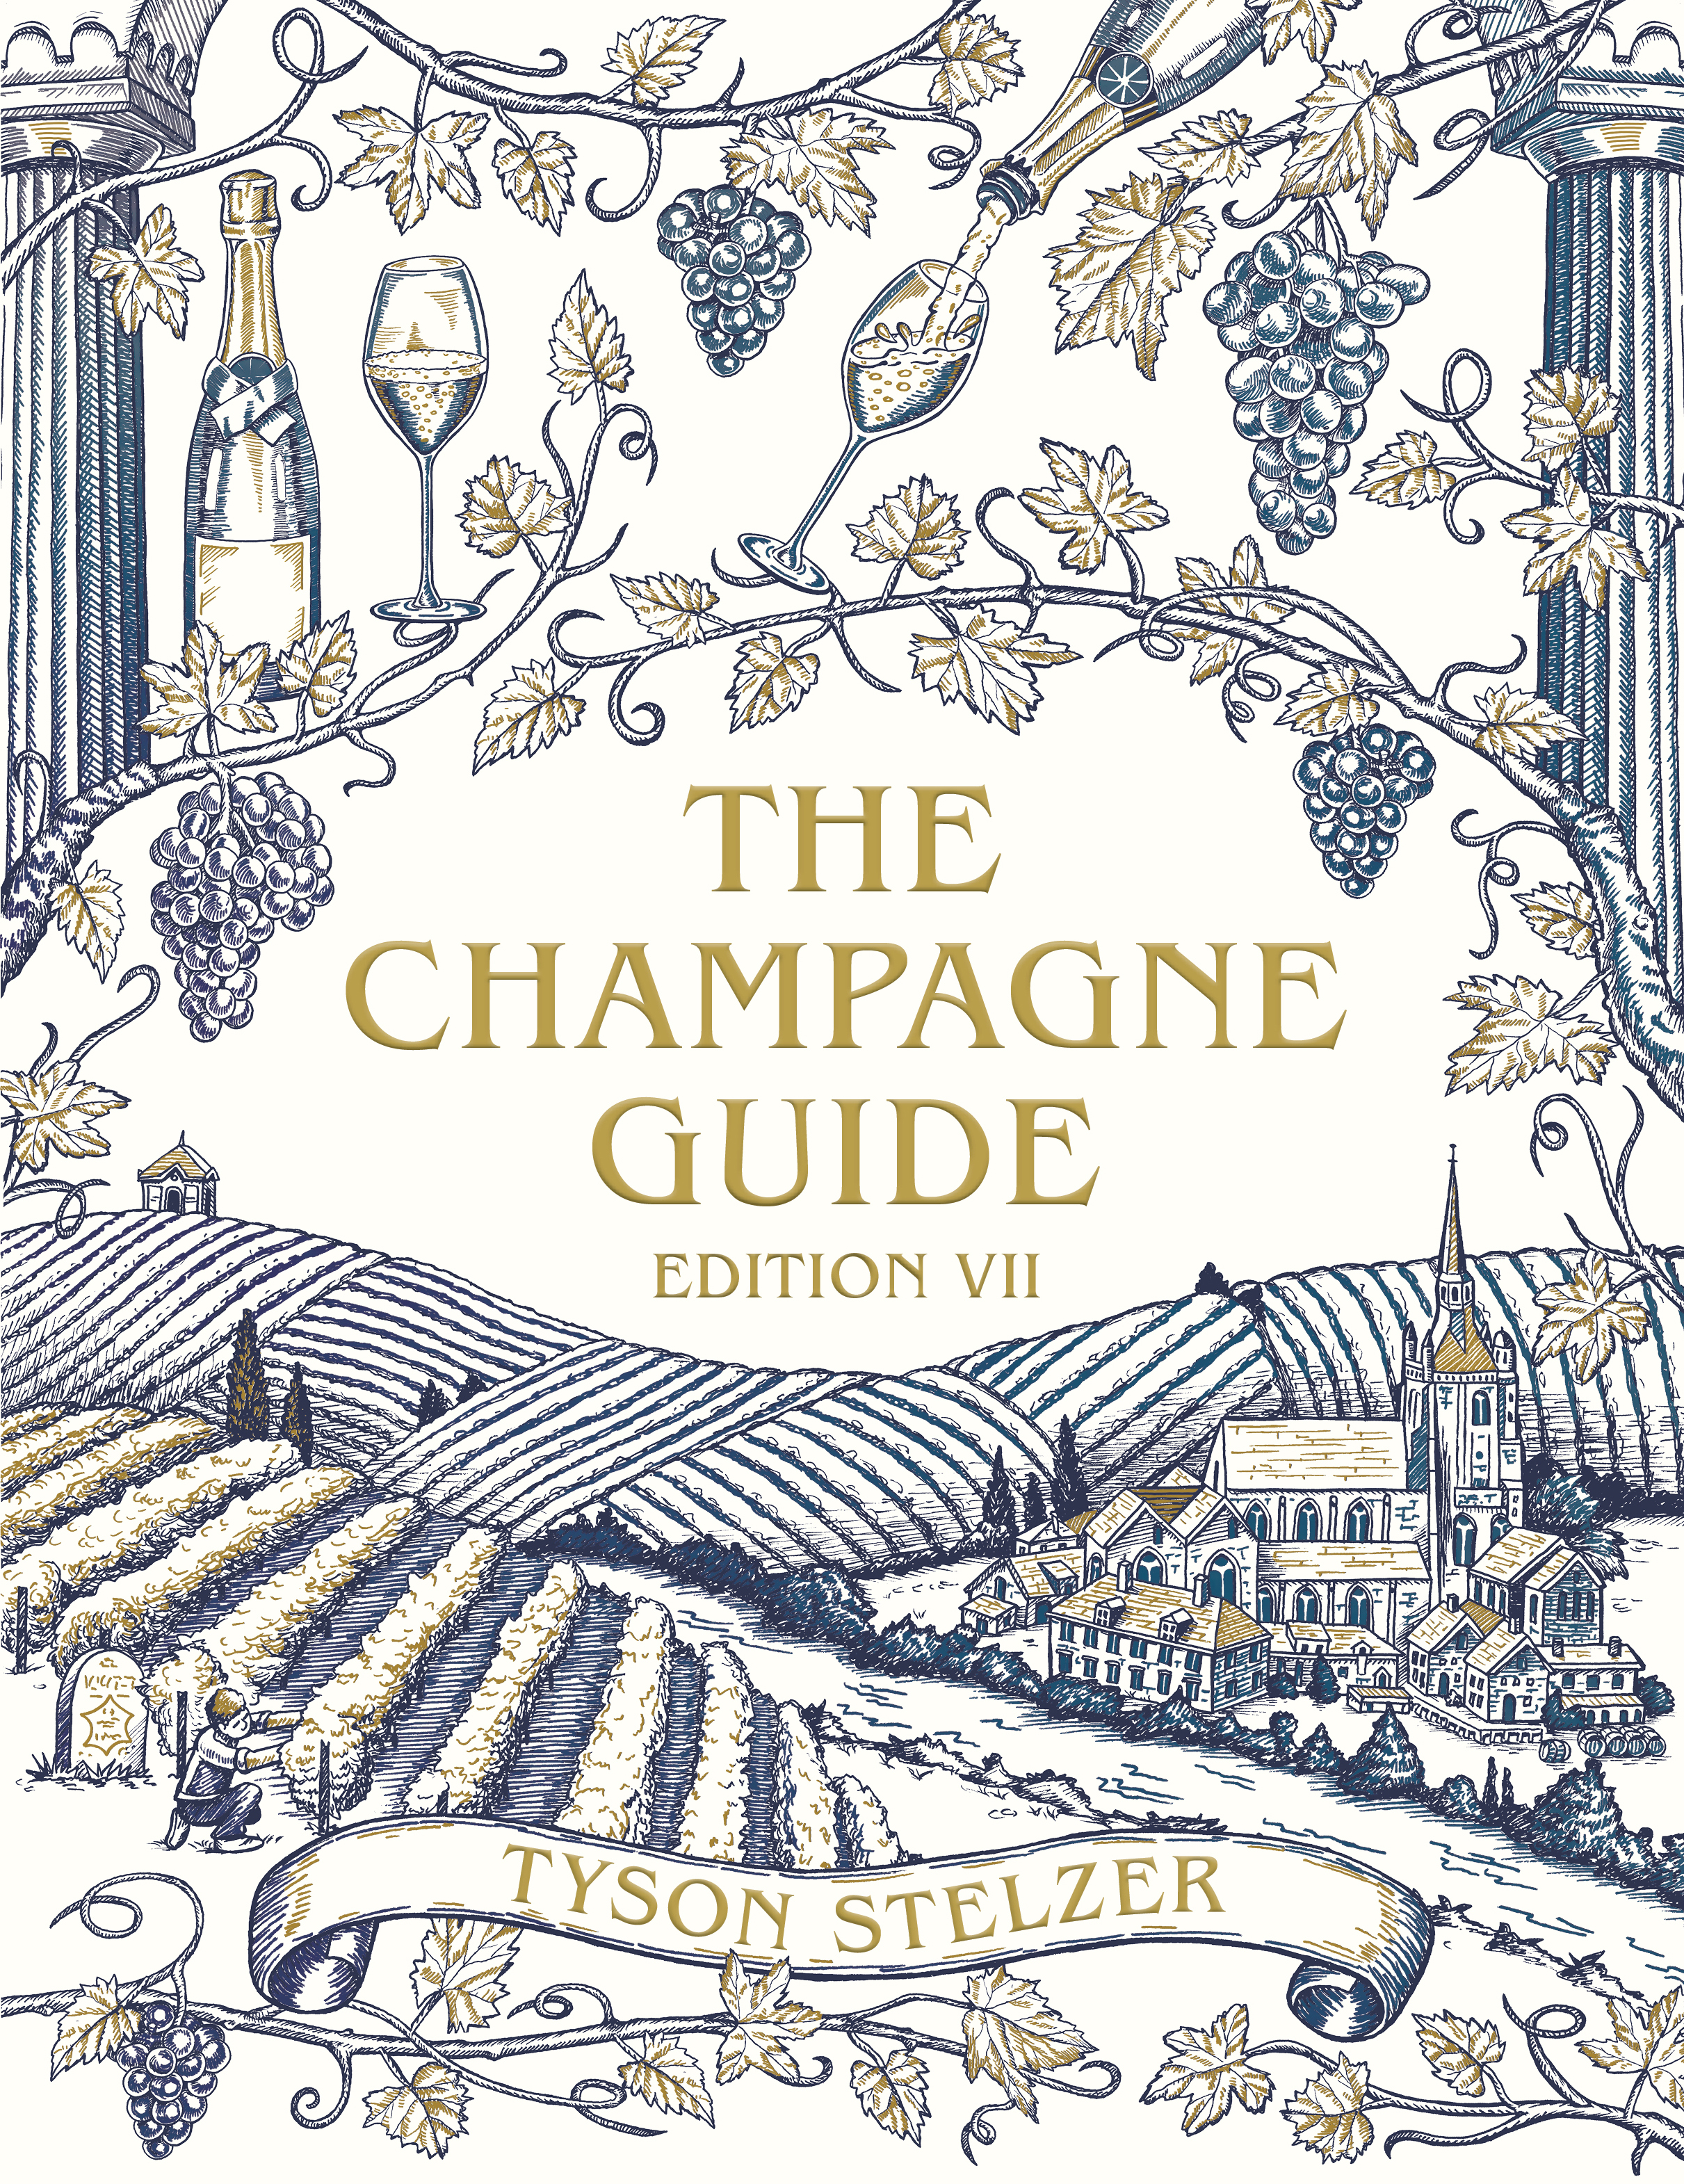 The Champagne Guide Edition VII